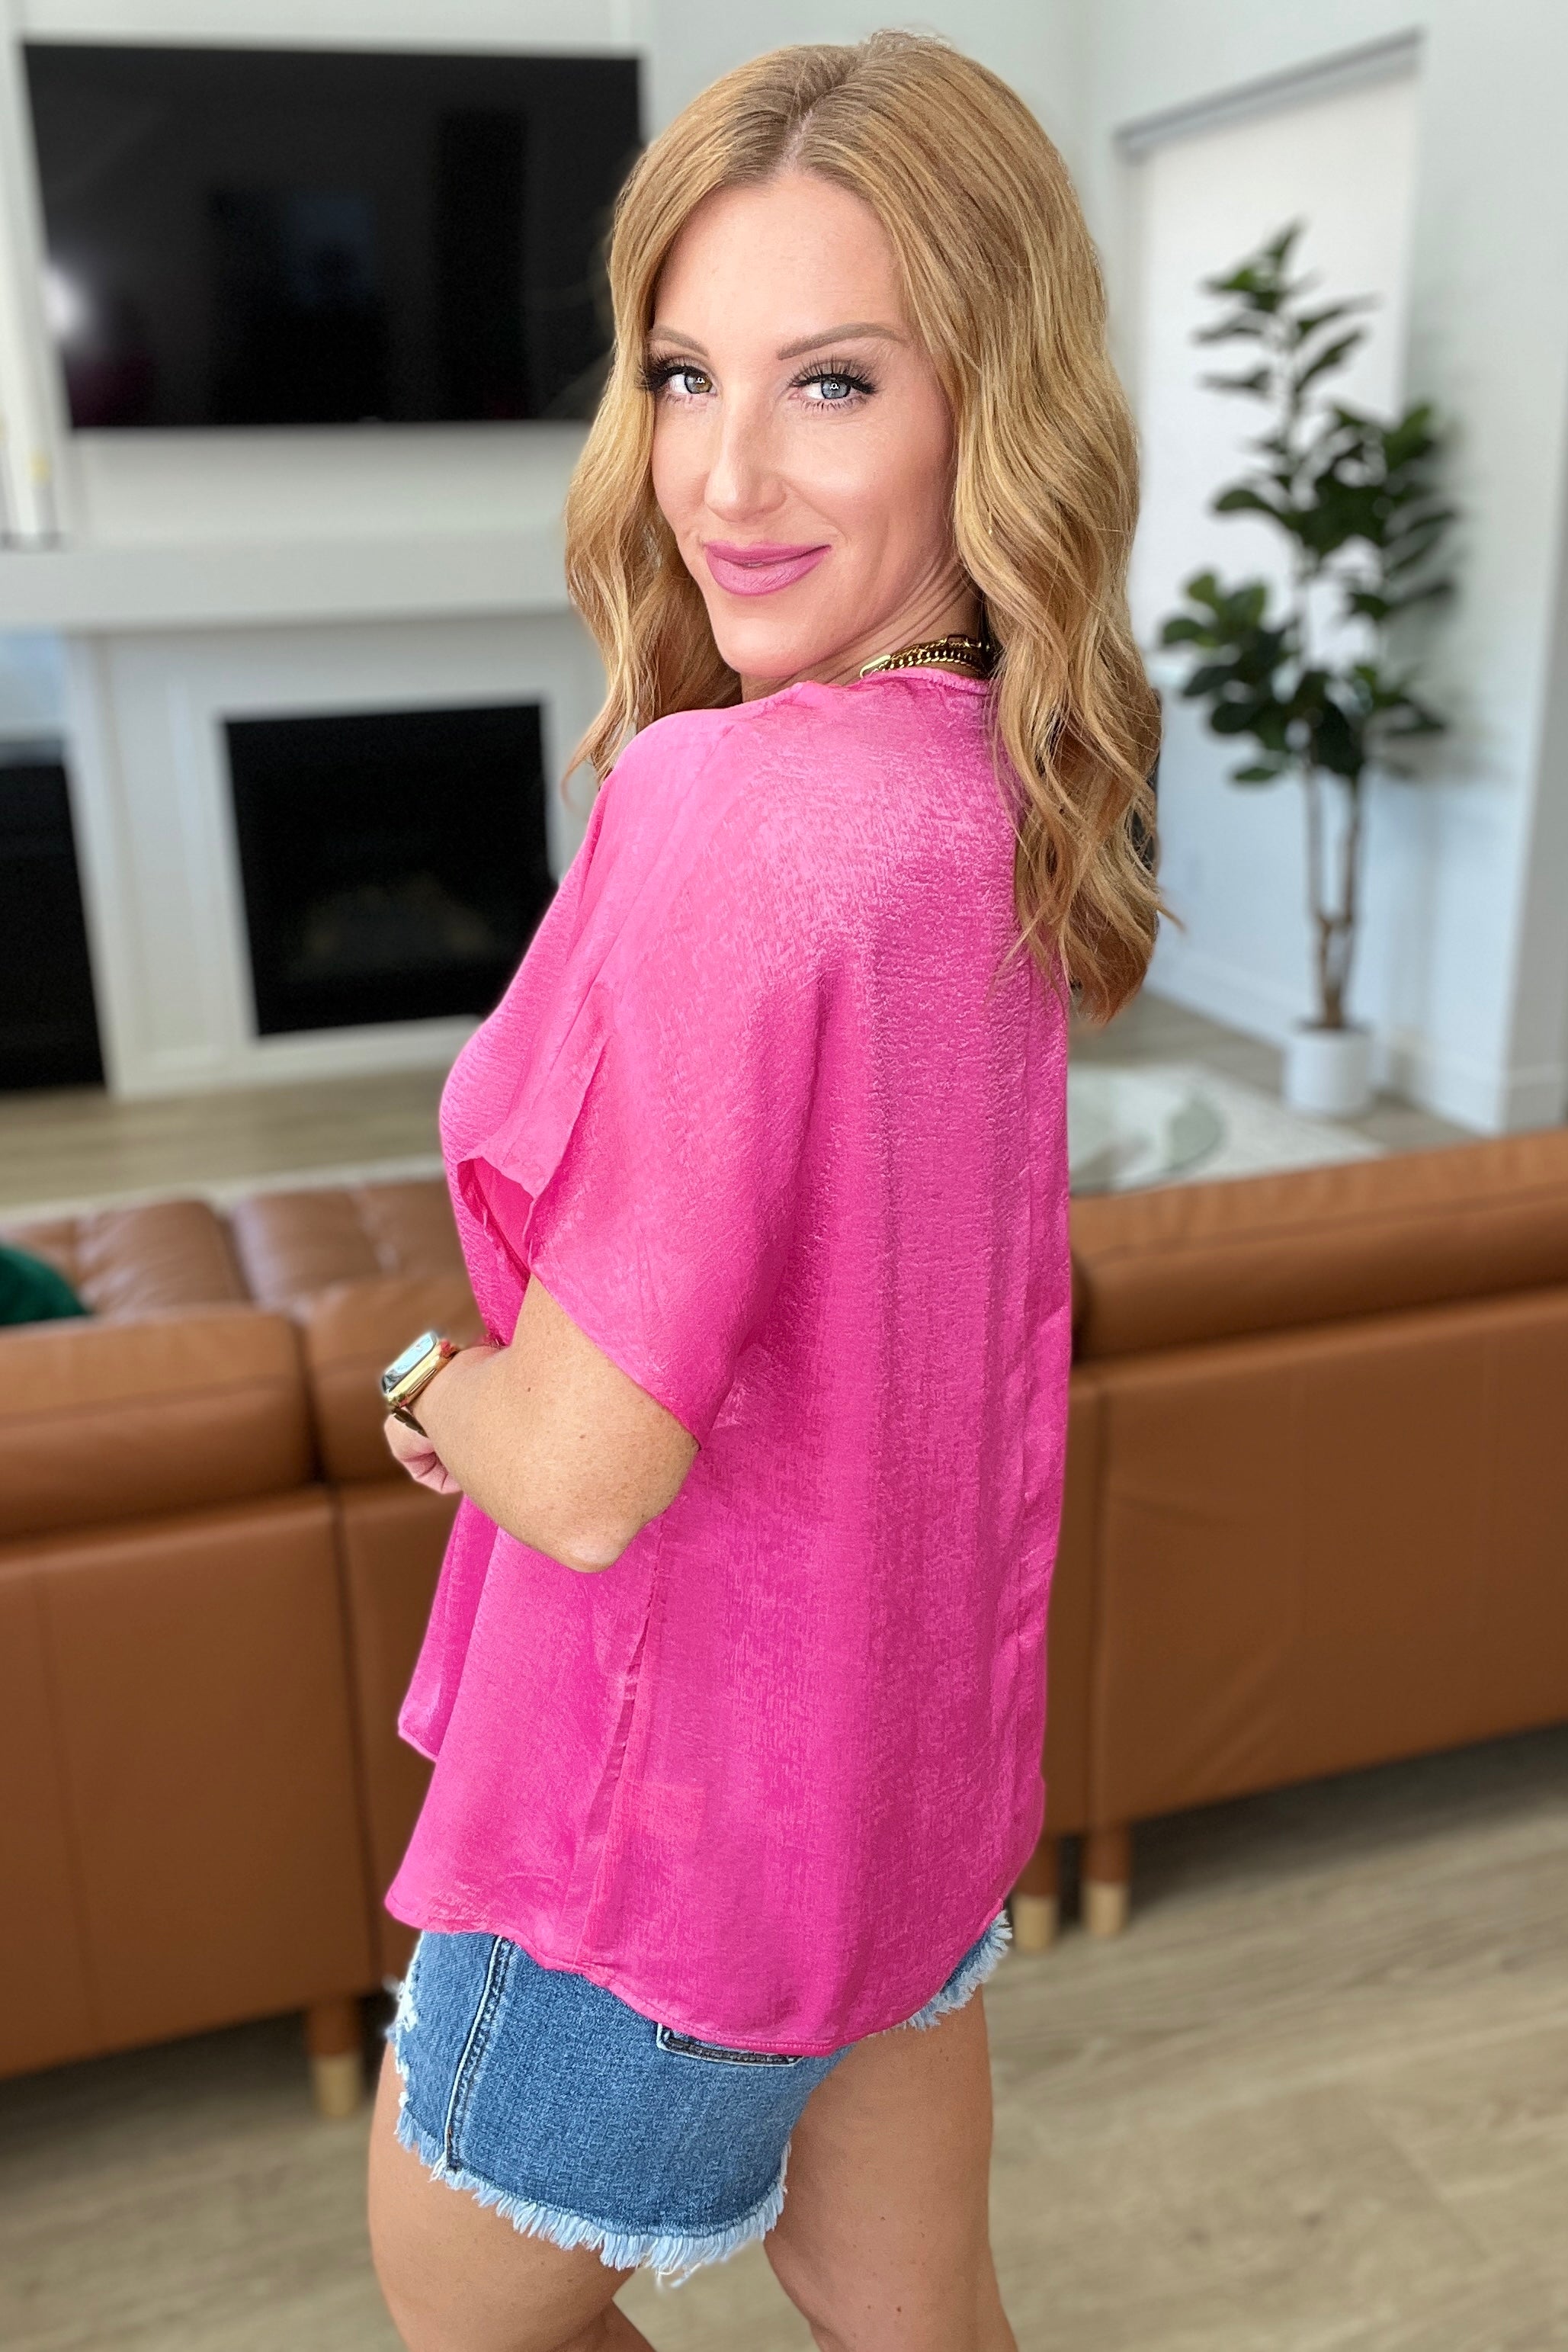 Priscilla Pleat Front V-Neck Top in Hot Pink, SM-3X